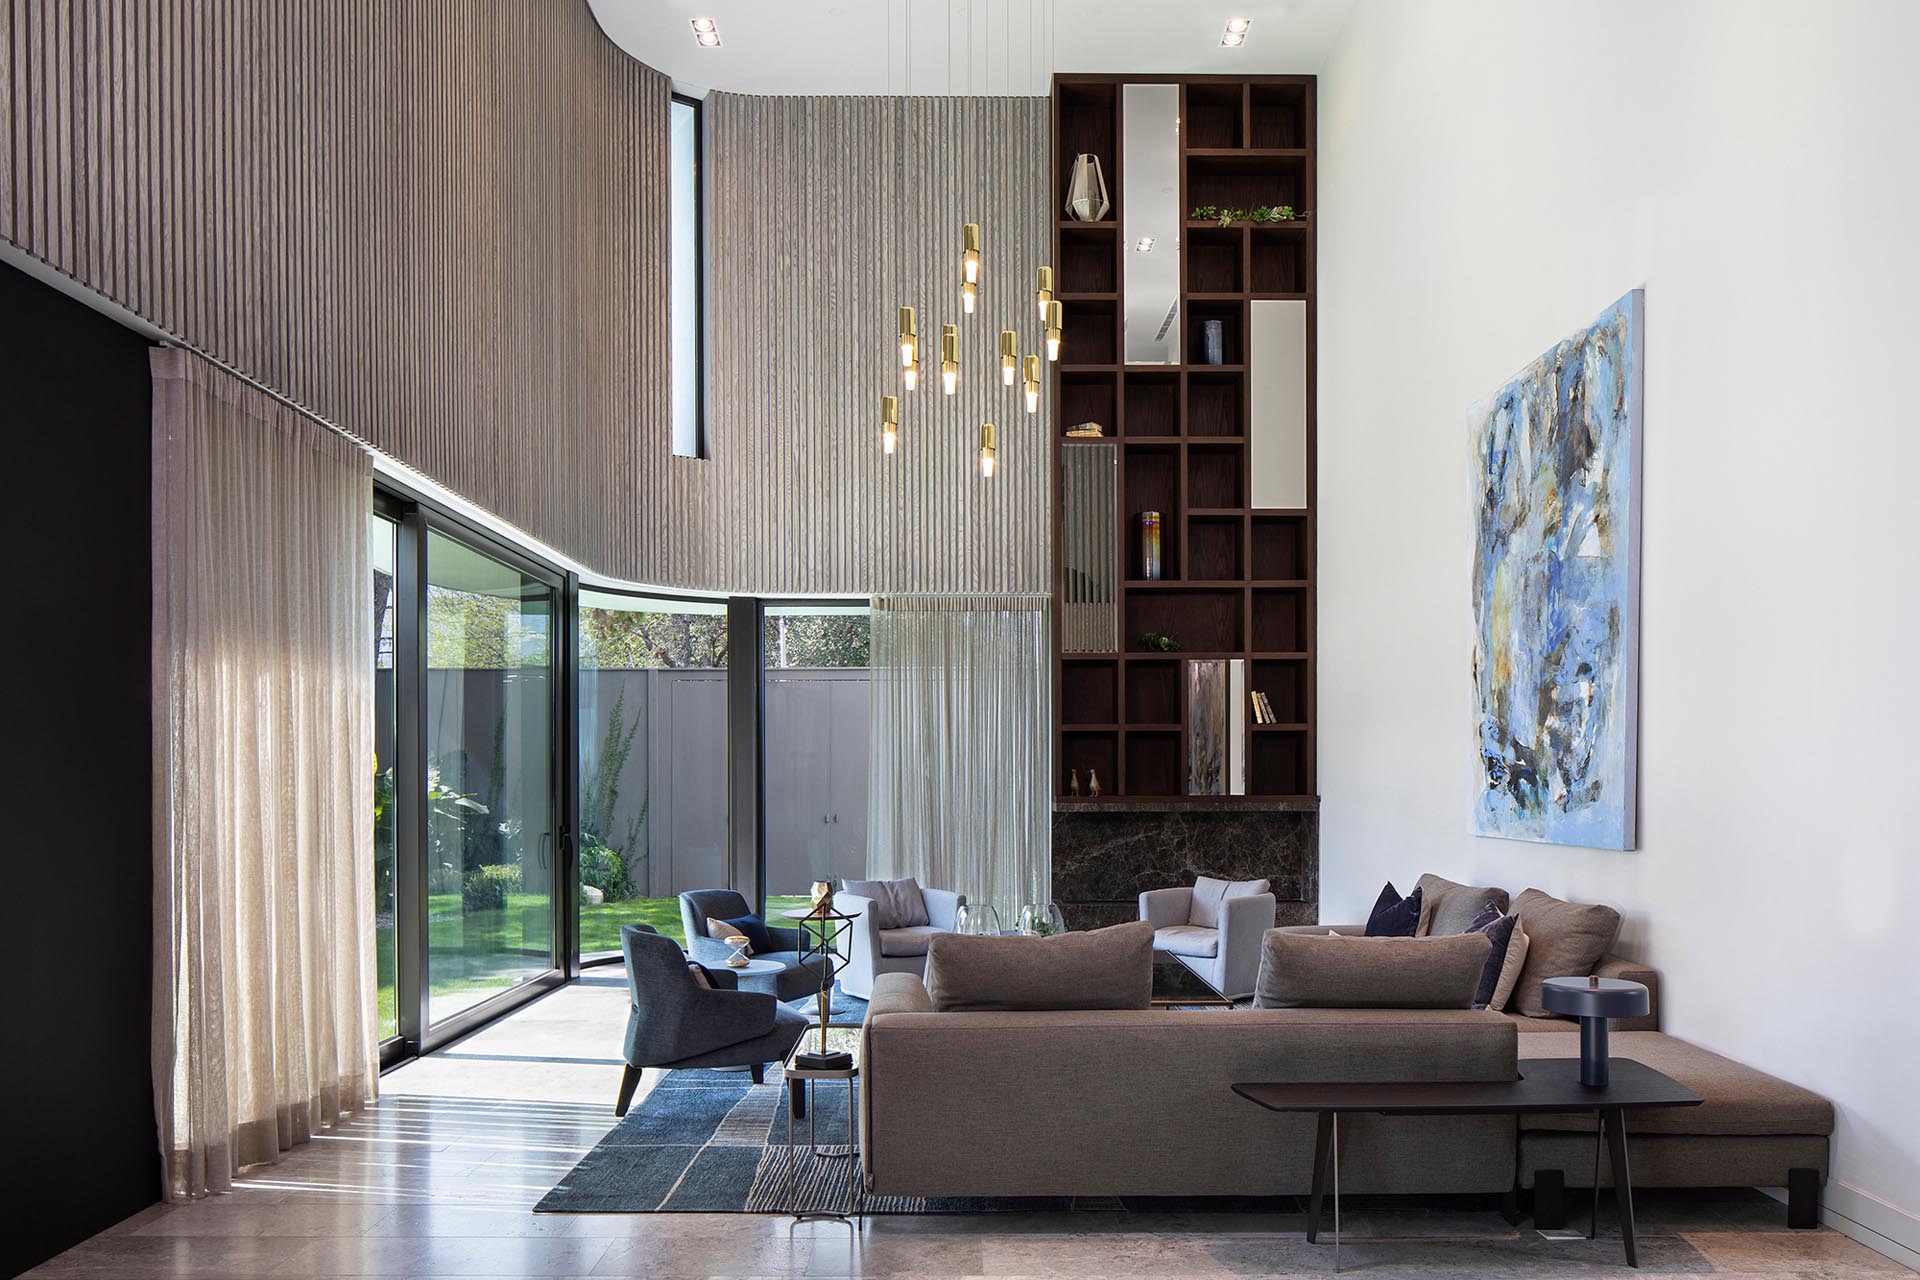 This modern living room opens up to the backyard via two large sliding glass doors that retract into a hidden pocket. Vertical wood paneling echoes the pattern of the exterior pipe screen.